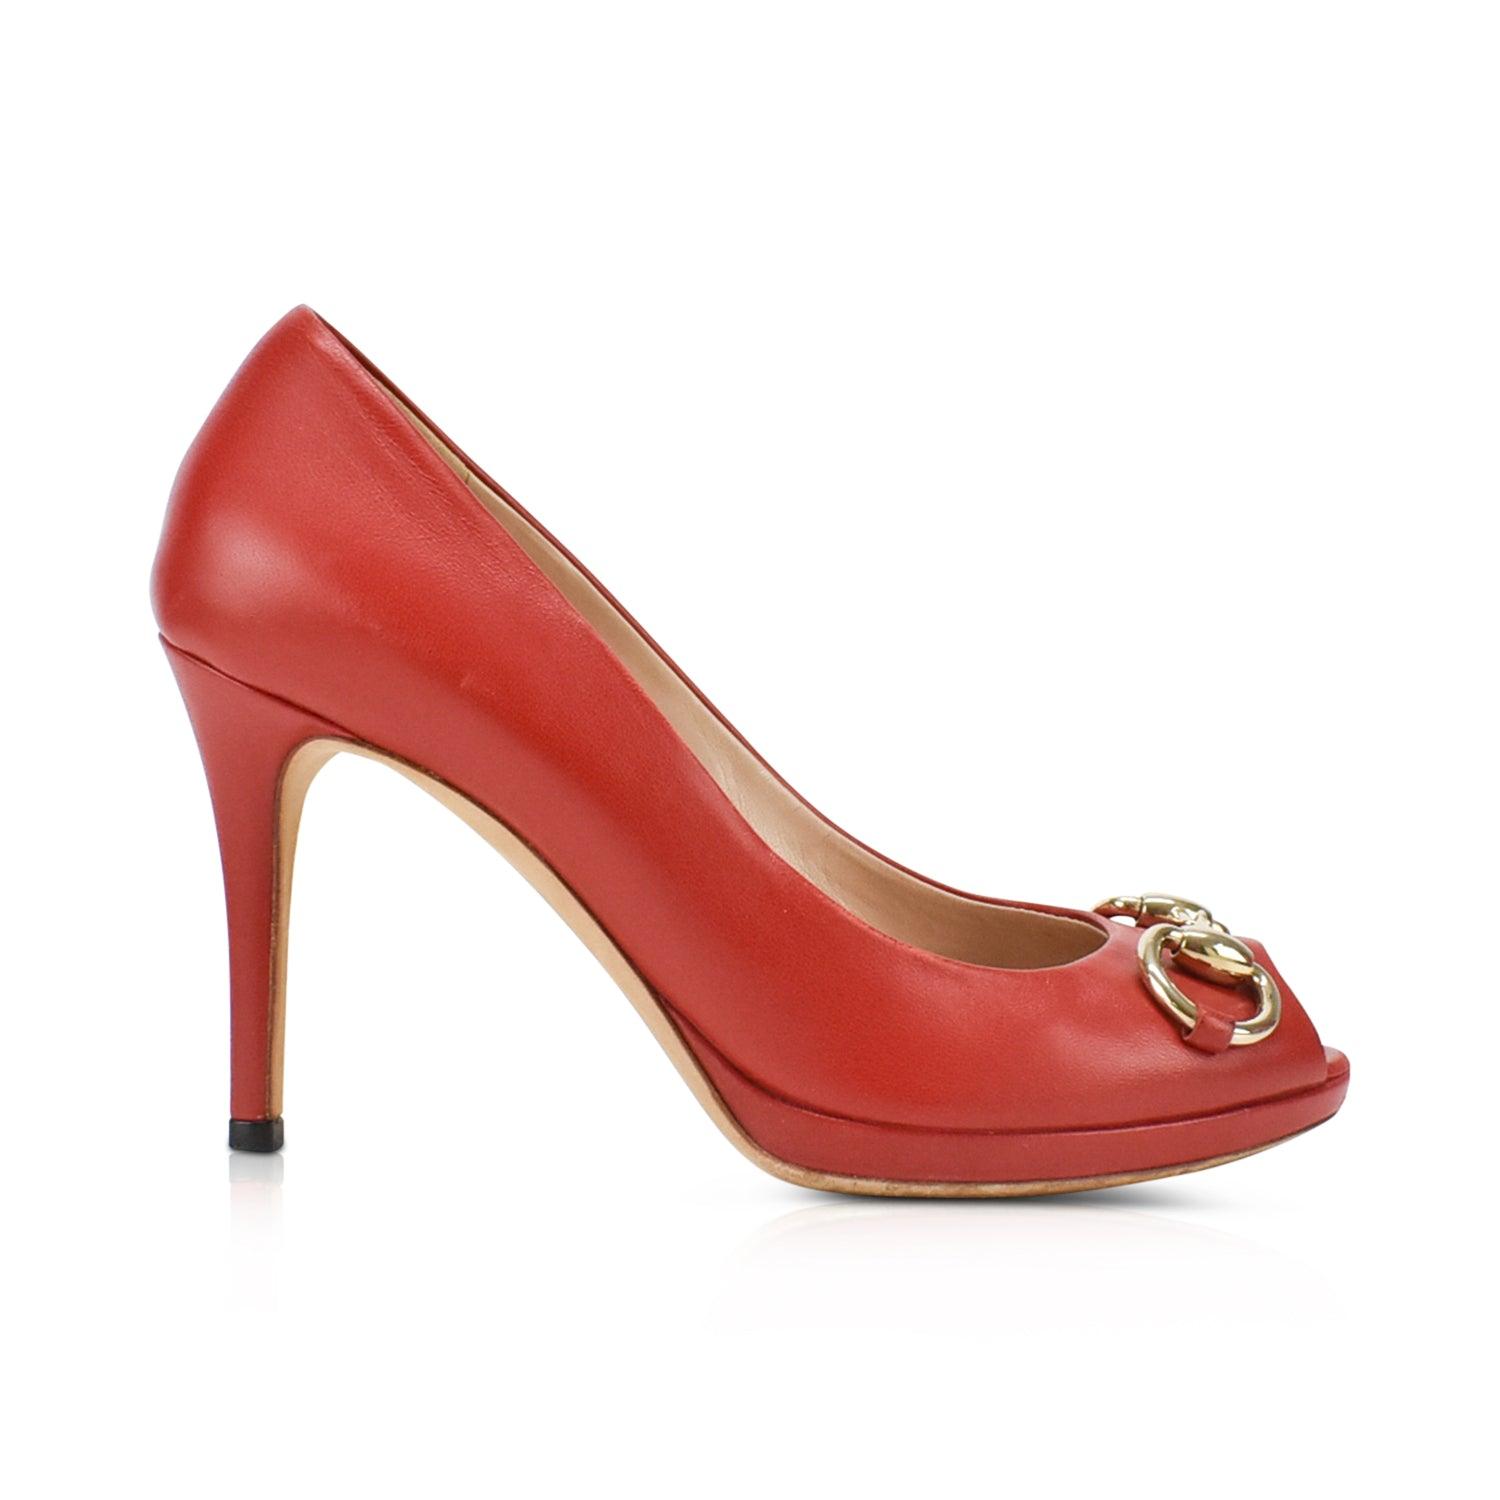 Gucci Pumps - Women's 35.5 - Fashionably Yours